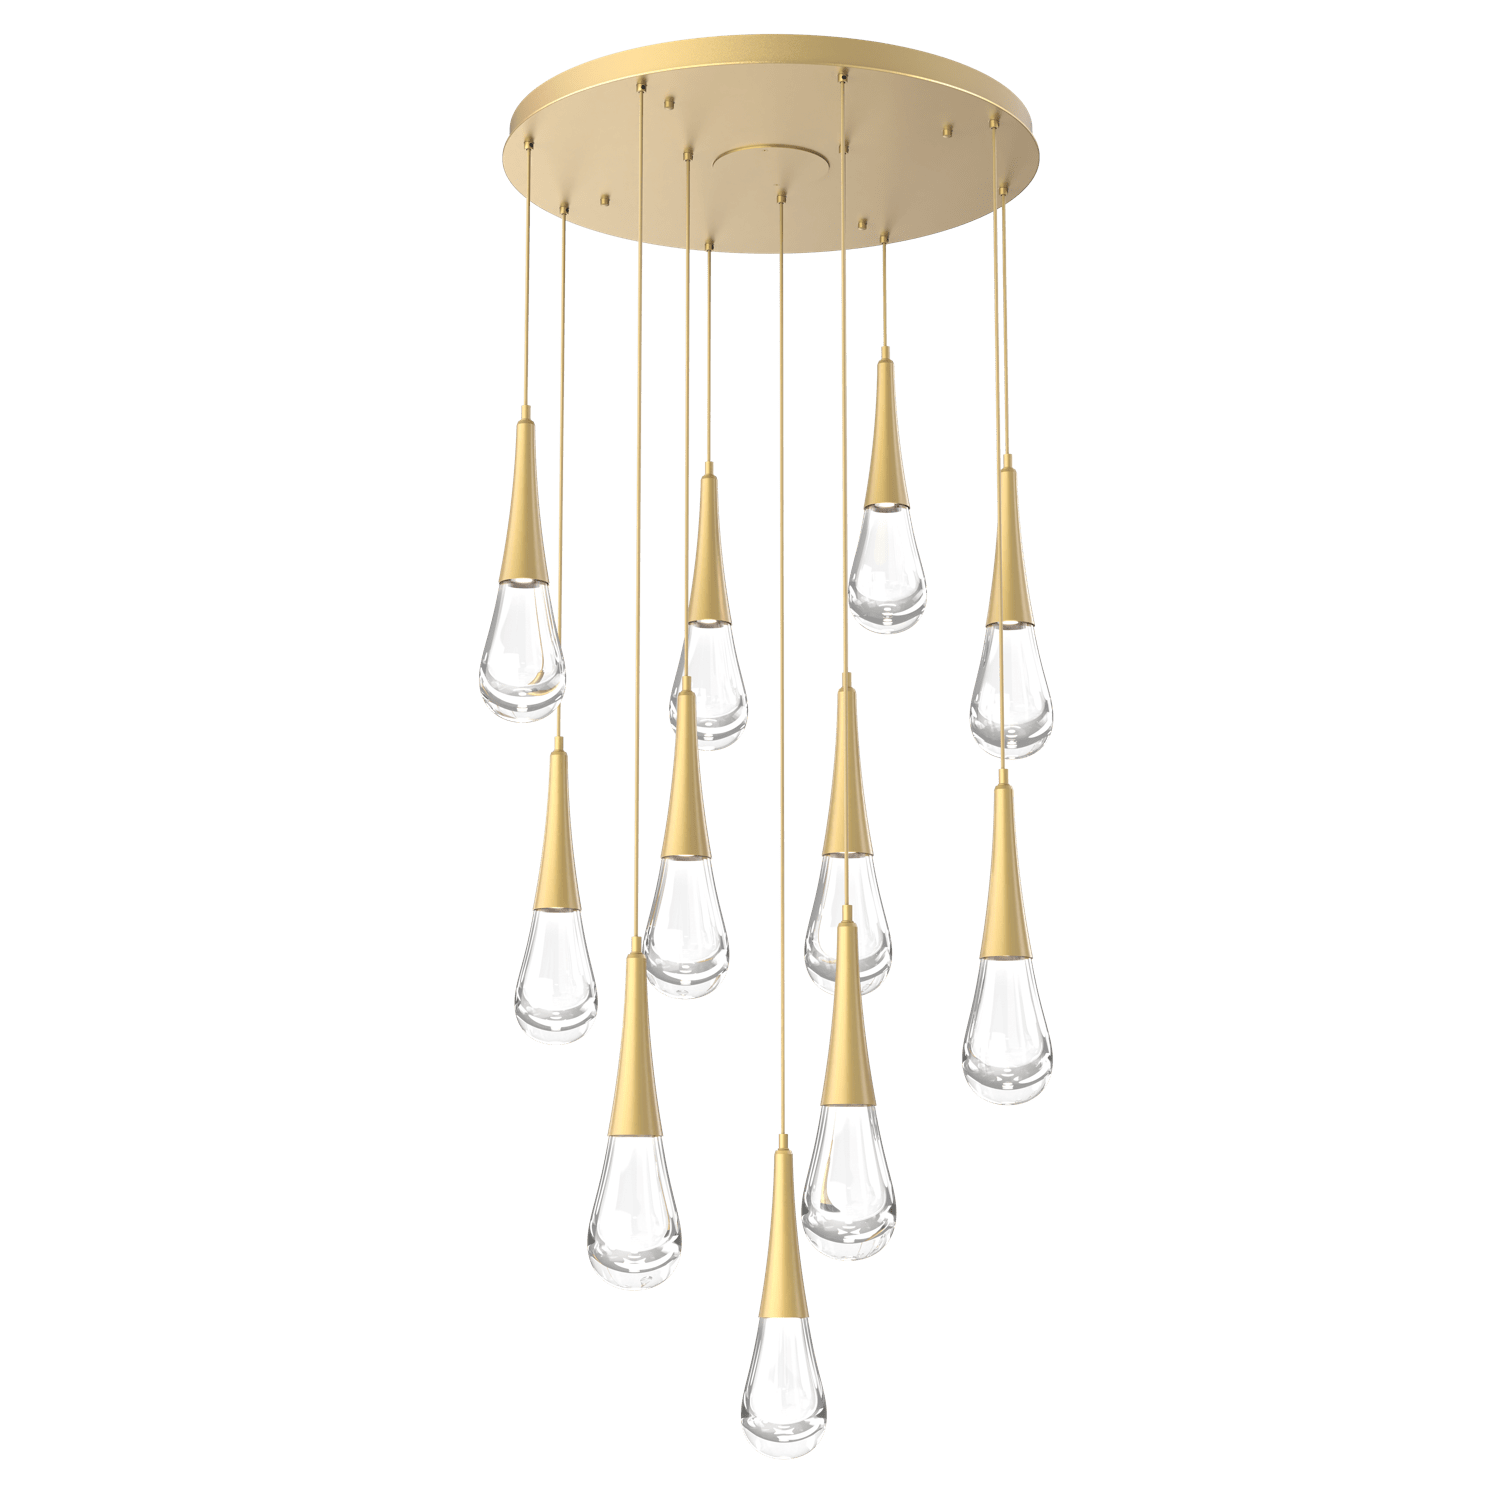 CHB0078-11-GB-Hammerton-Studio-Raindrop-11-light-round-pendant-chandelier-with-gilded-brass-finish-and-clear-blown-glass-shades-and-LED-lamping